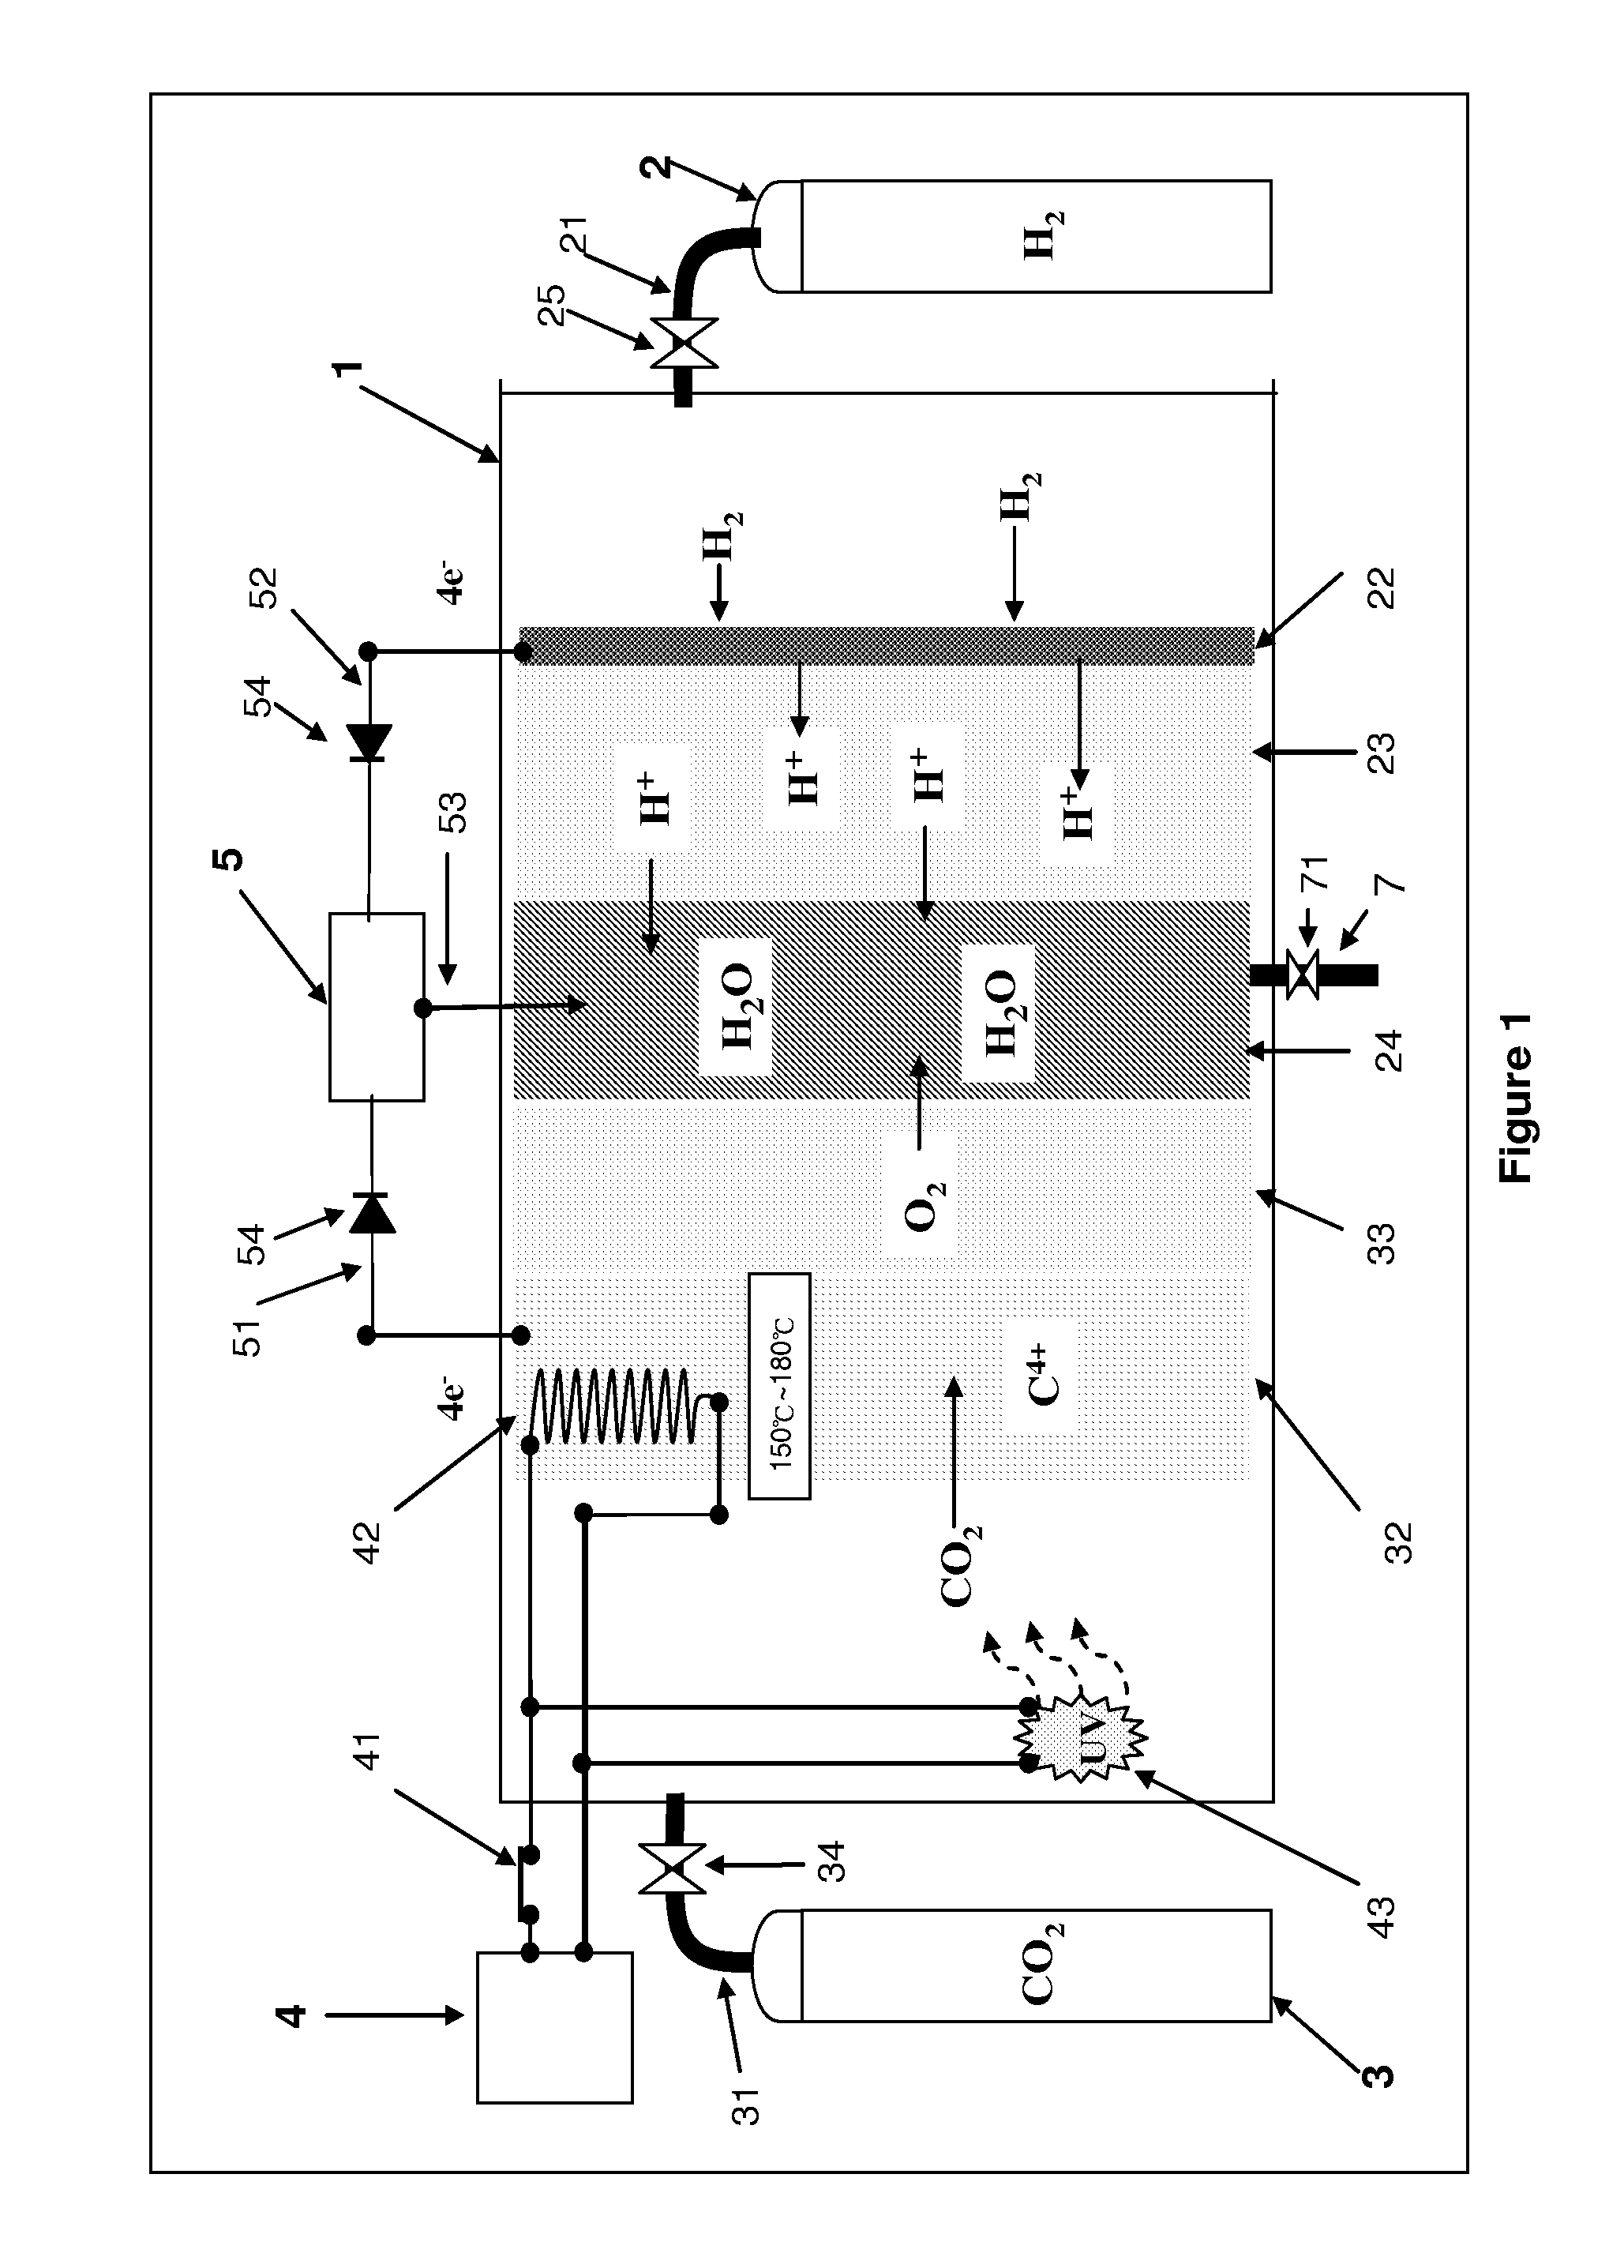 CARBON DIOXIDE DISSOLUTION AND C4+nM STATE CARBON RECYCLING DEVICE AND METHOD